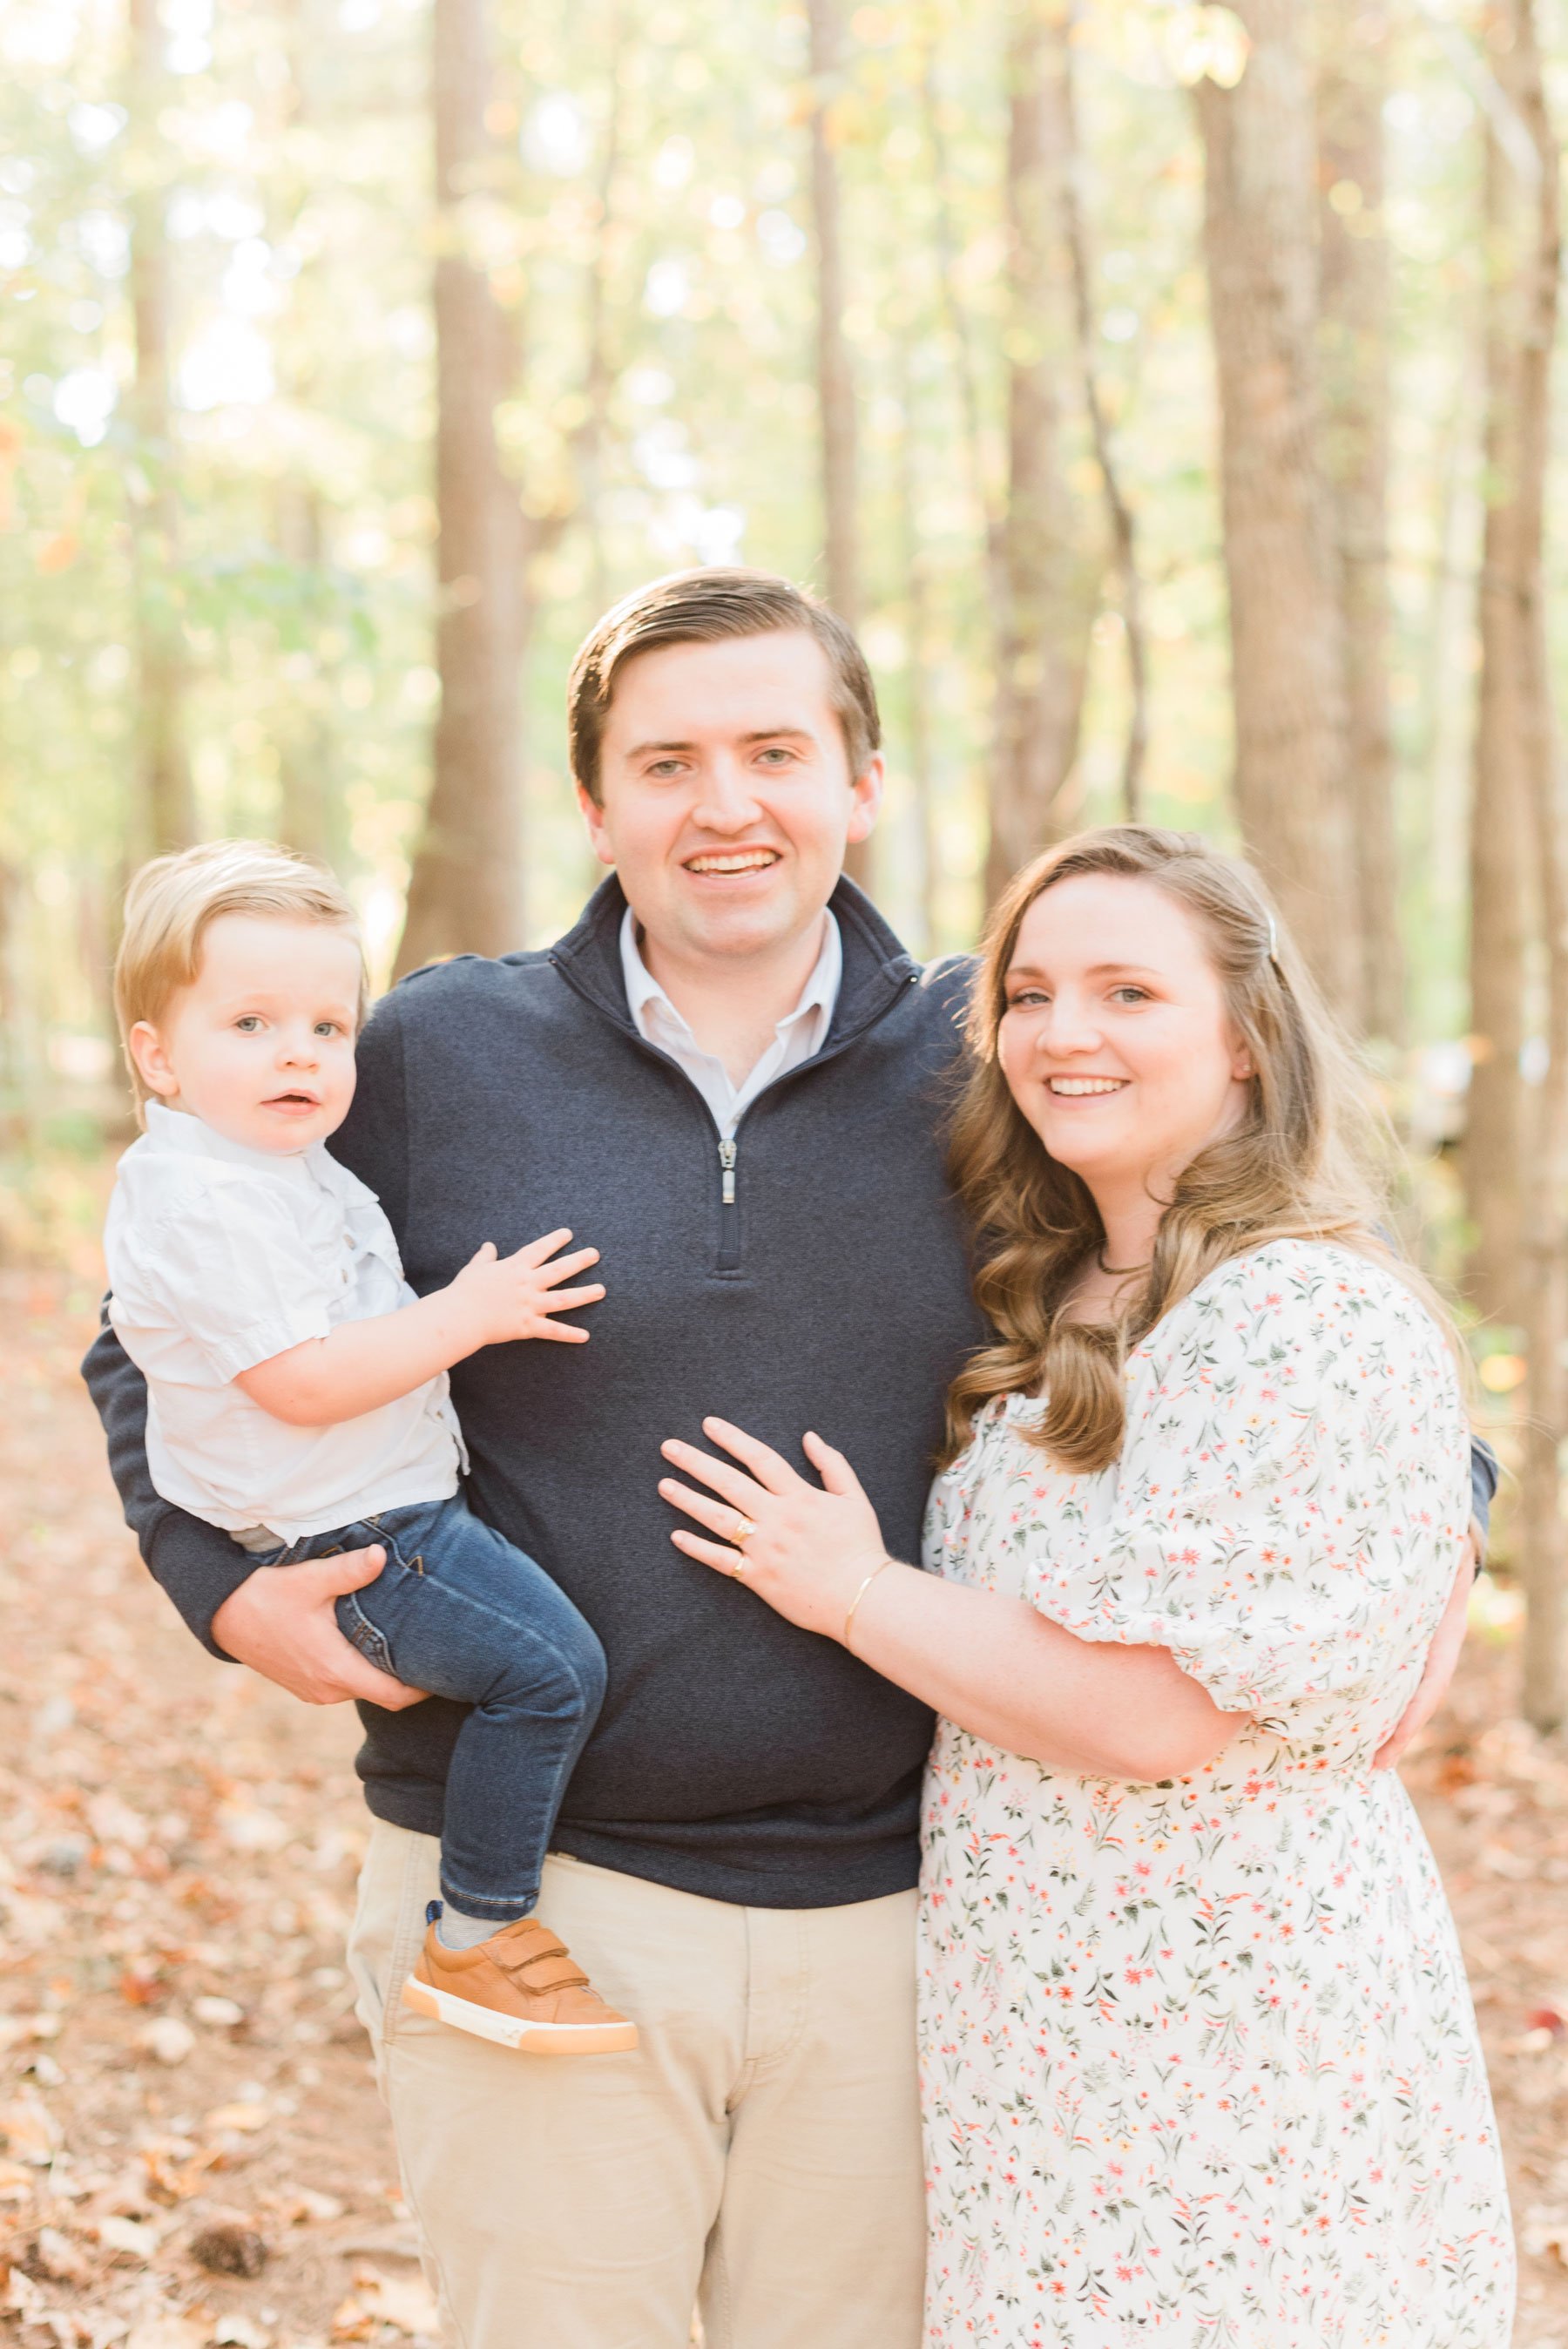  Jacquie Erickson, an Atlanta-based photographer, photographs a young family of three in the woods near Atlanta, Georgia. Family of three little boy mama’s boy Altlanta, Georgia #jacquieericksonphotography #atlantaphotographer #familyphotos #familyof